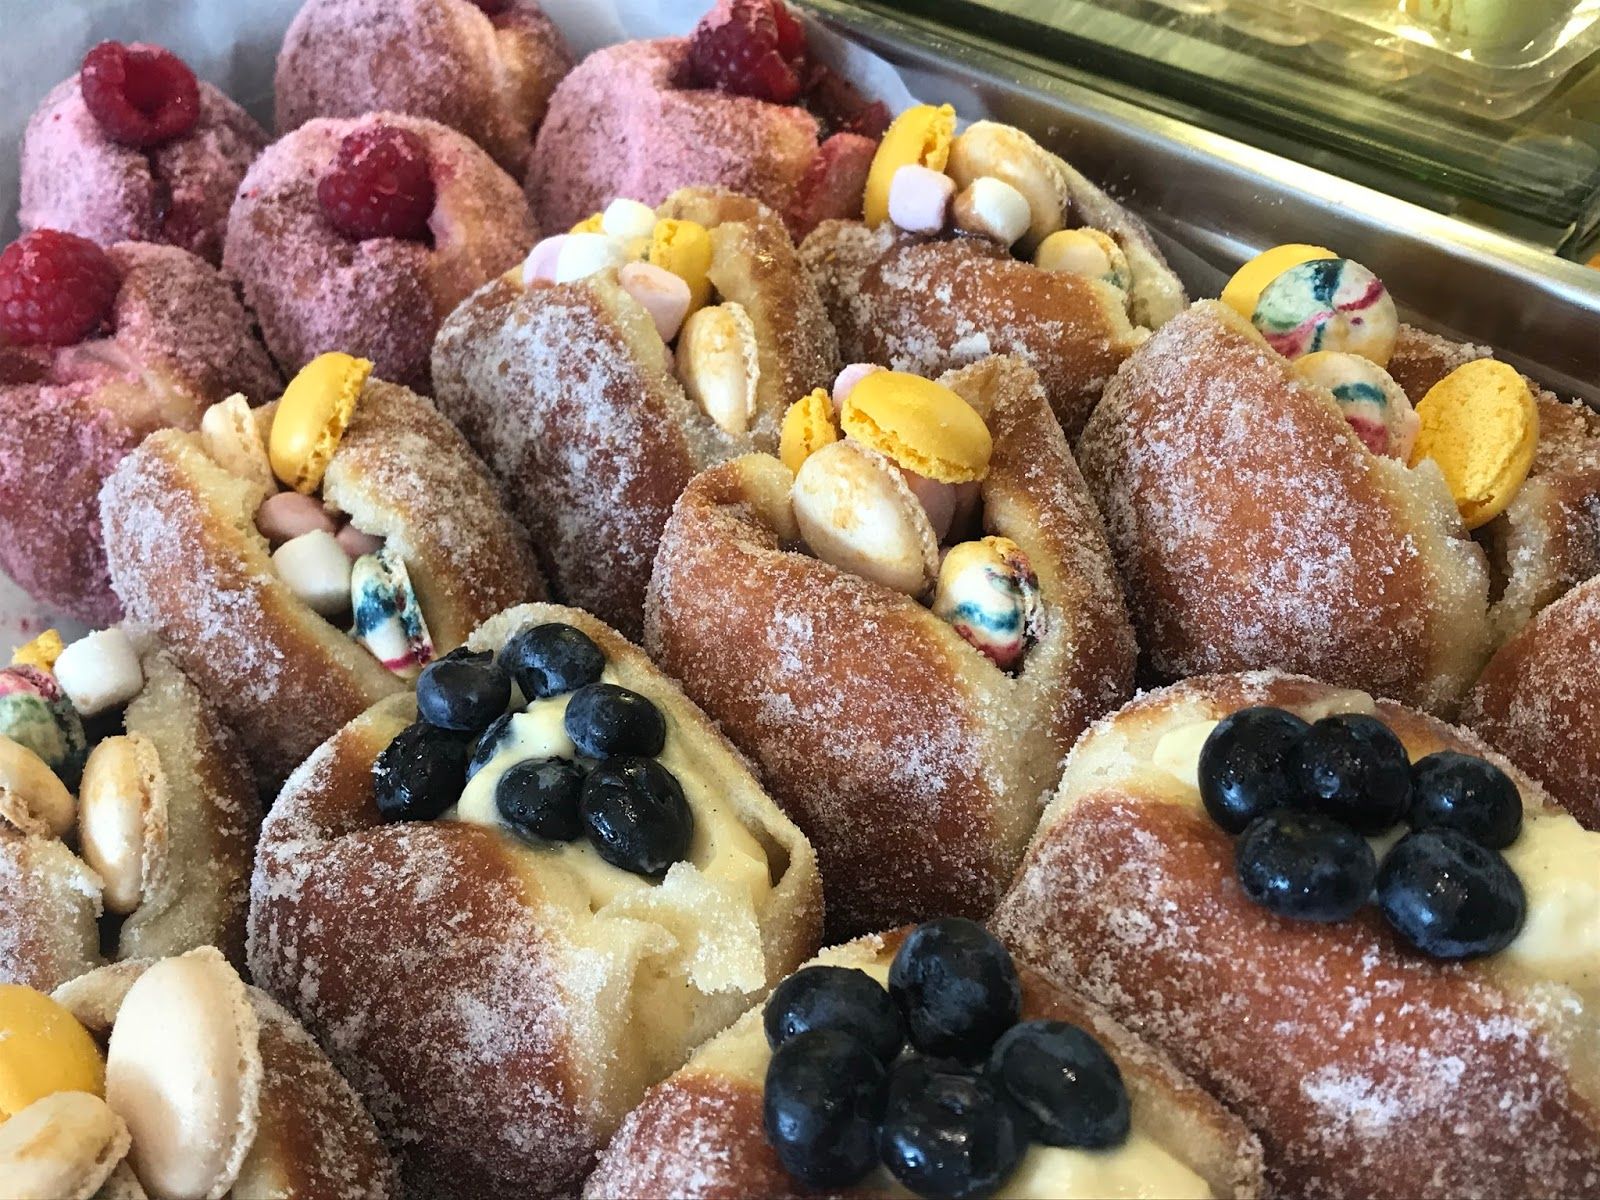 doughnuts with fruits and sweets